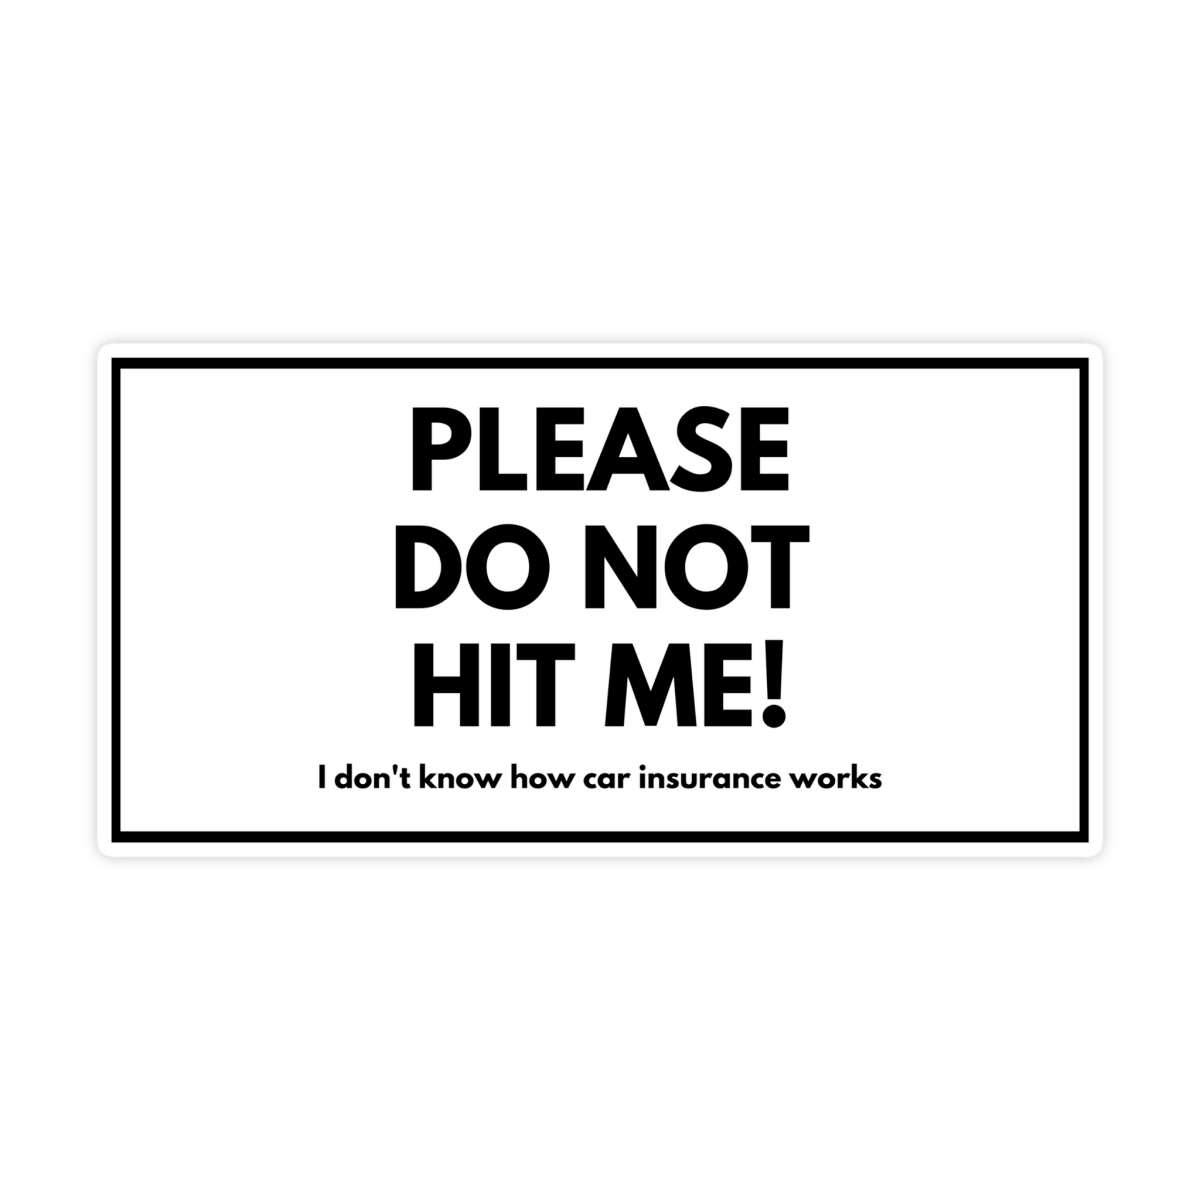 Please Do Not Hit Me IDK How Insurance Works Sticker - stickerbullPlease Do Not Hit Me IDK How Insurance Works StickerRetail StickerstickerbullstickerbullTaylor_InsuranceWhite [#235]Please Do Not Hit Me IDK How Insurance Works Sticker